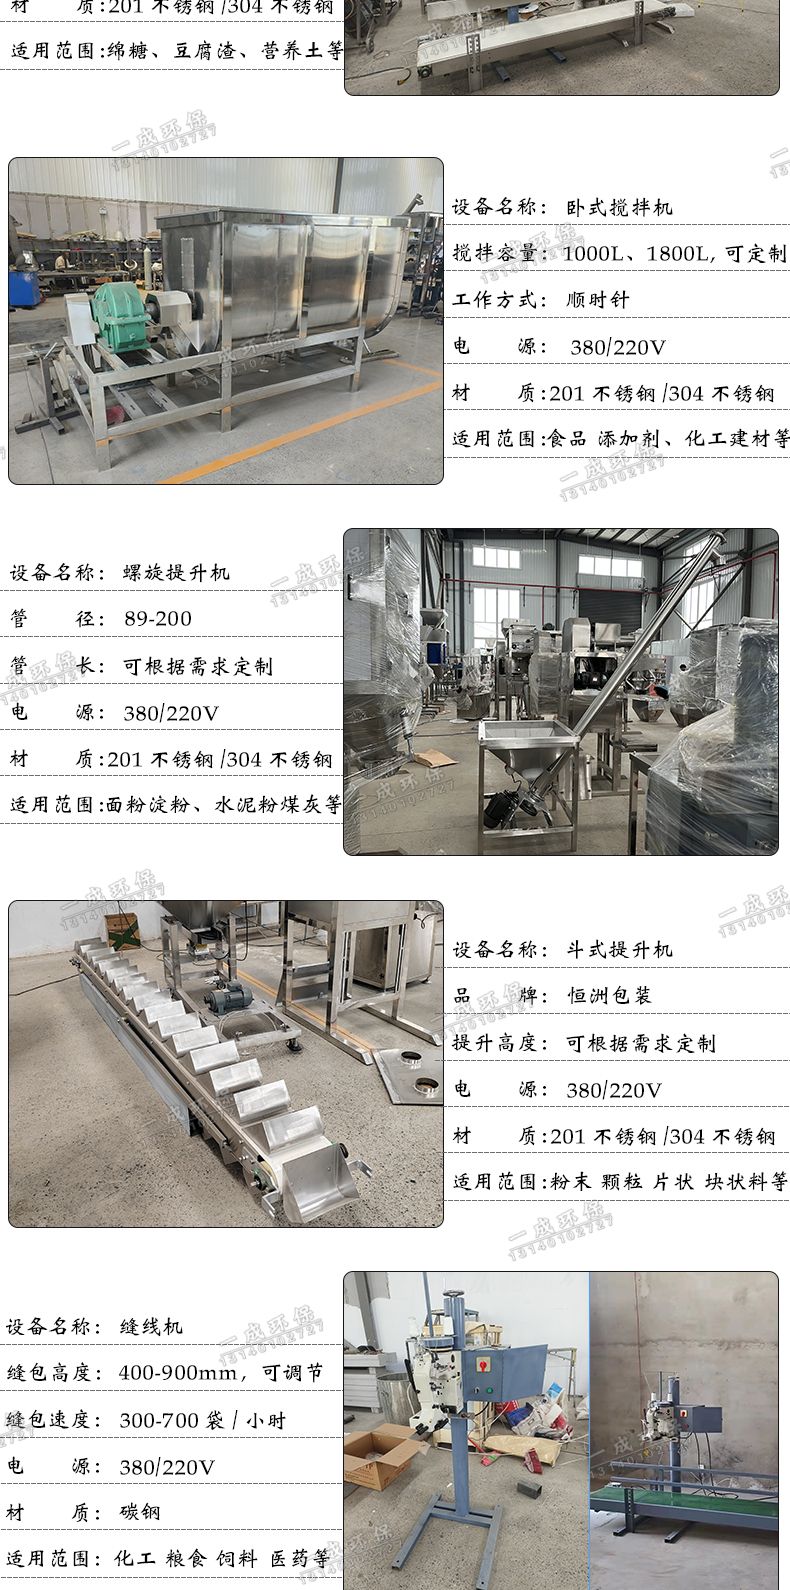 Quantitative packaging machine for grains and miscellaneous grains, seed peanut sub packaging and filling machine